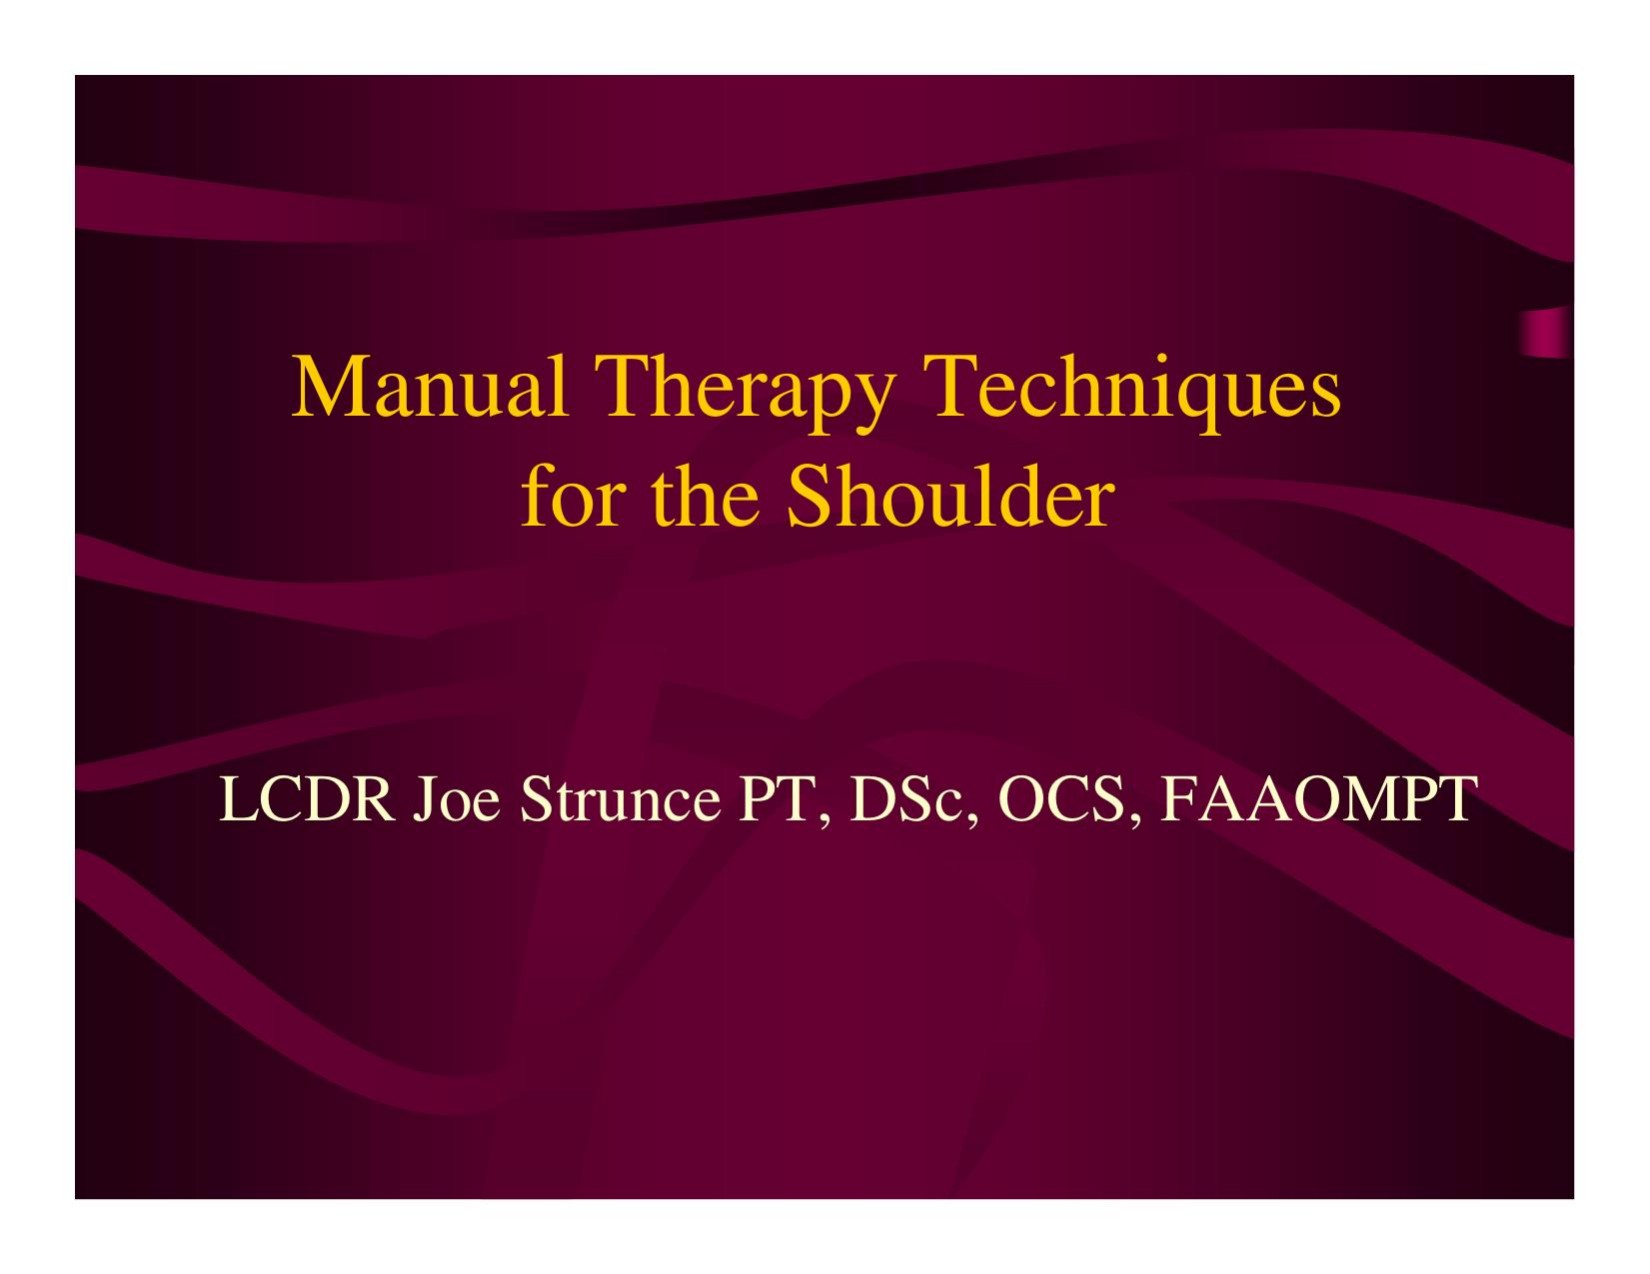 Manual Therapy Techniques for the Shoulder